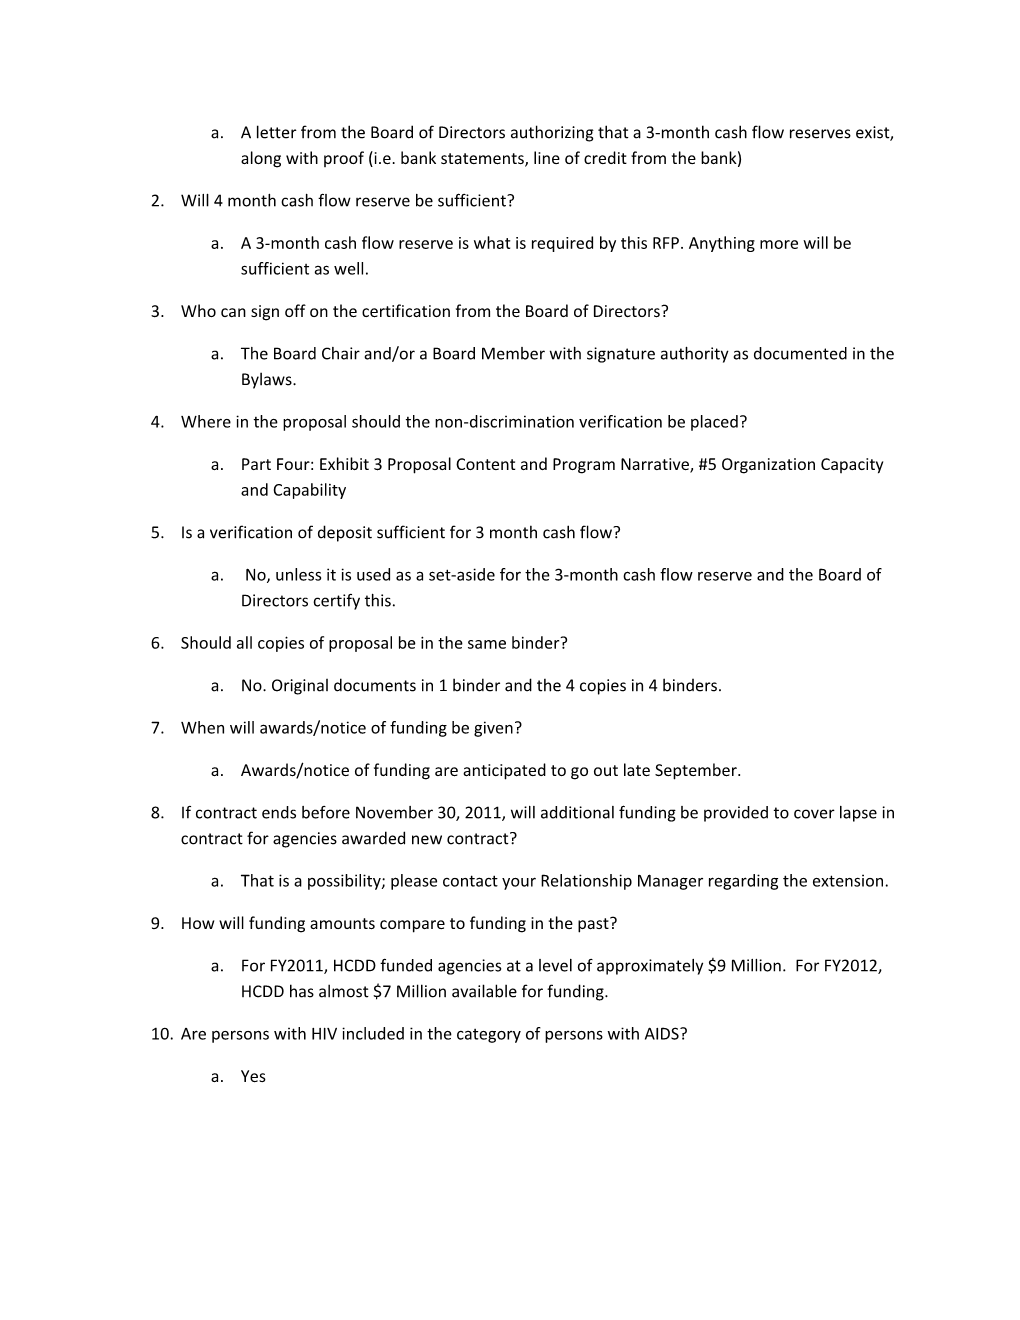 Questions from RFP Pre-Proposal Meeting